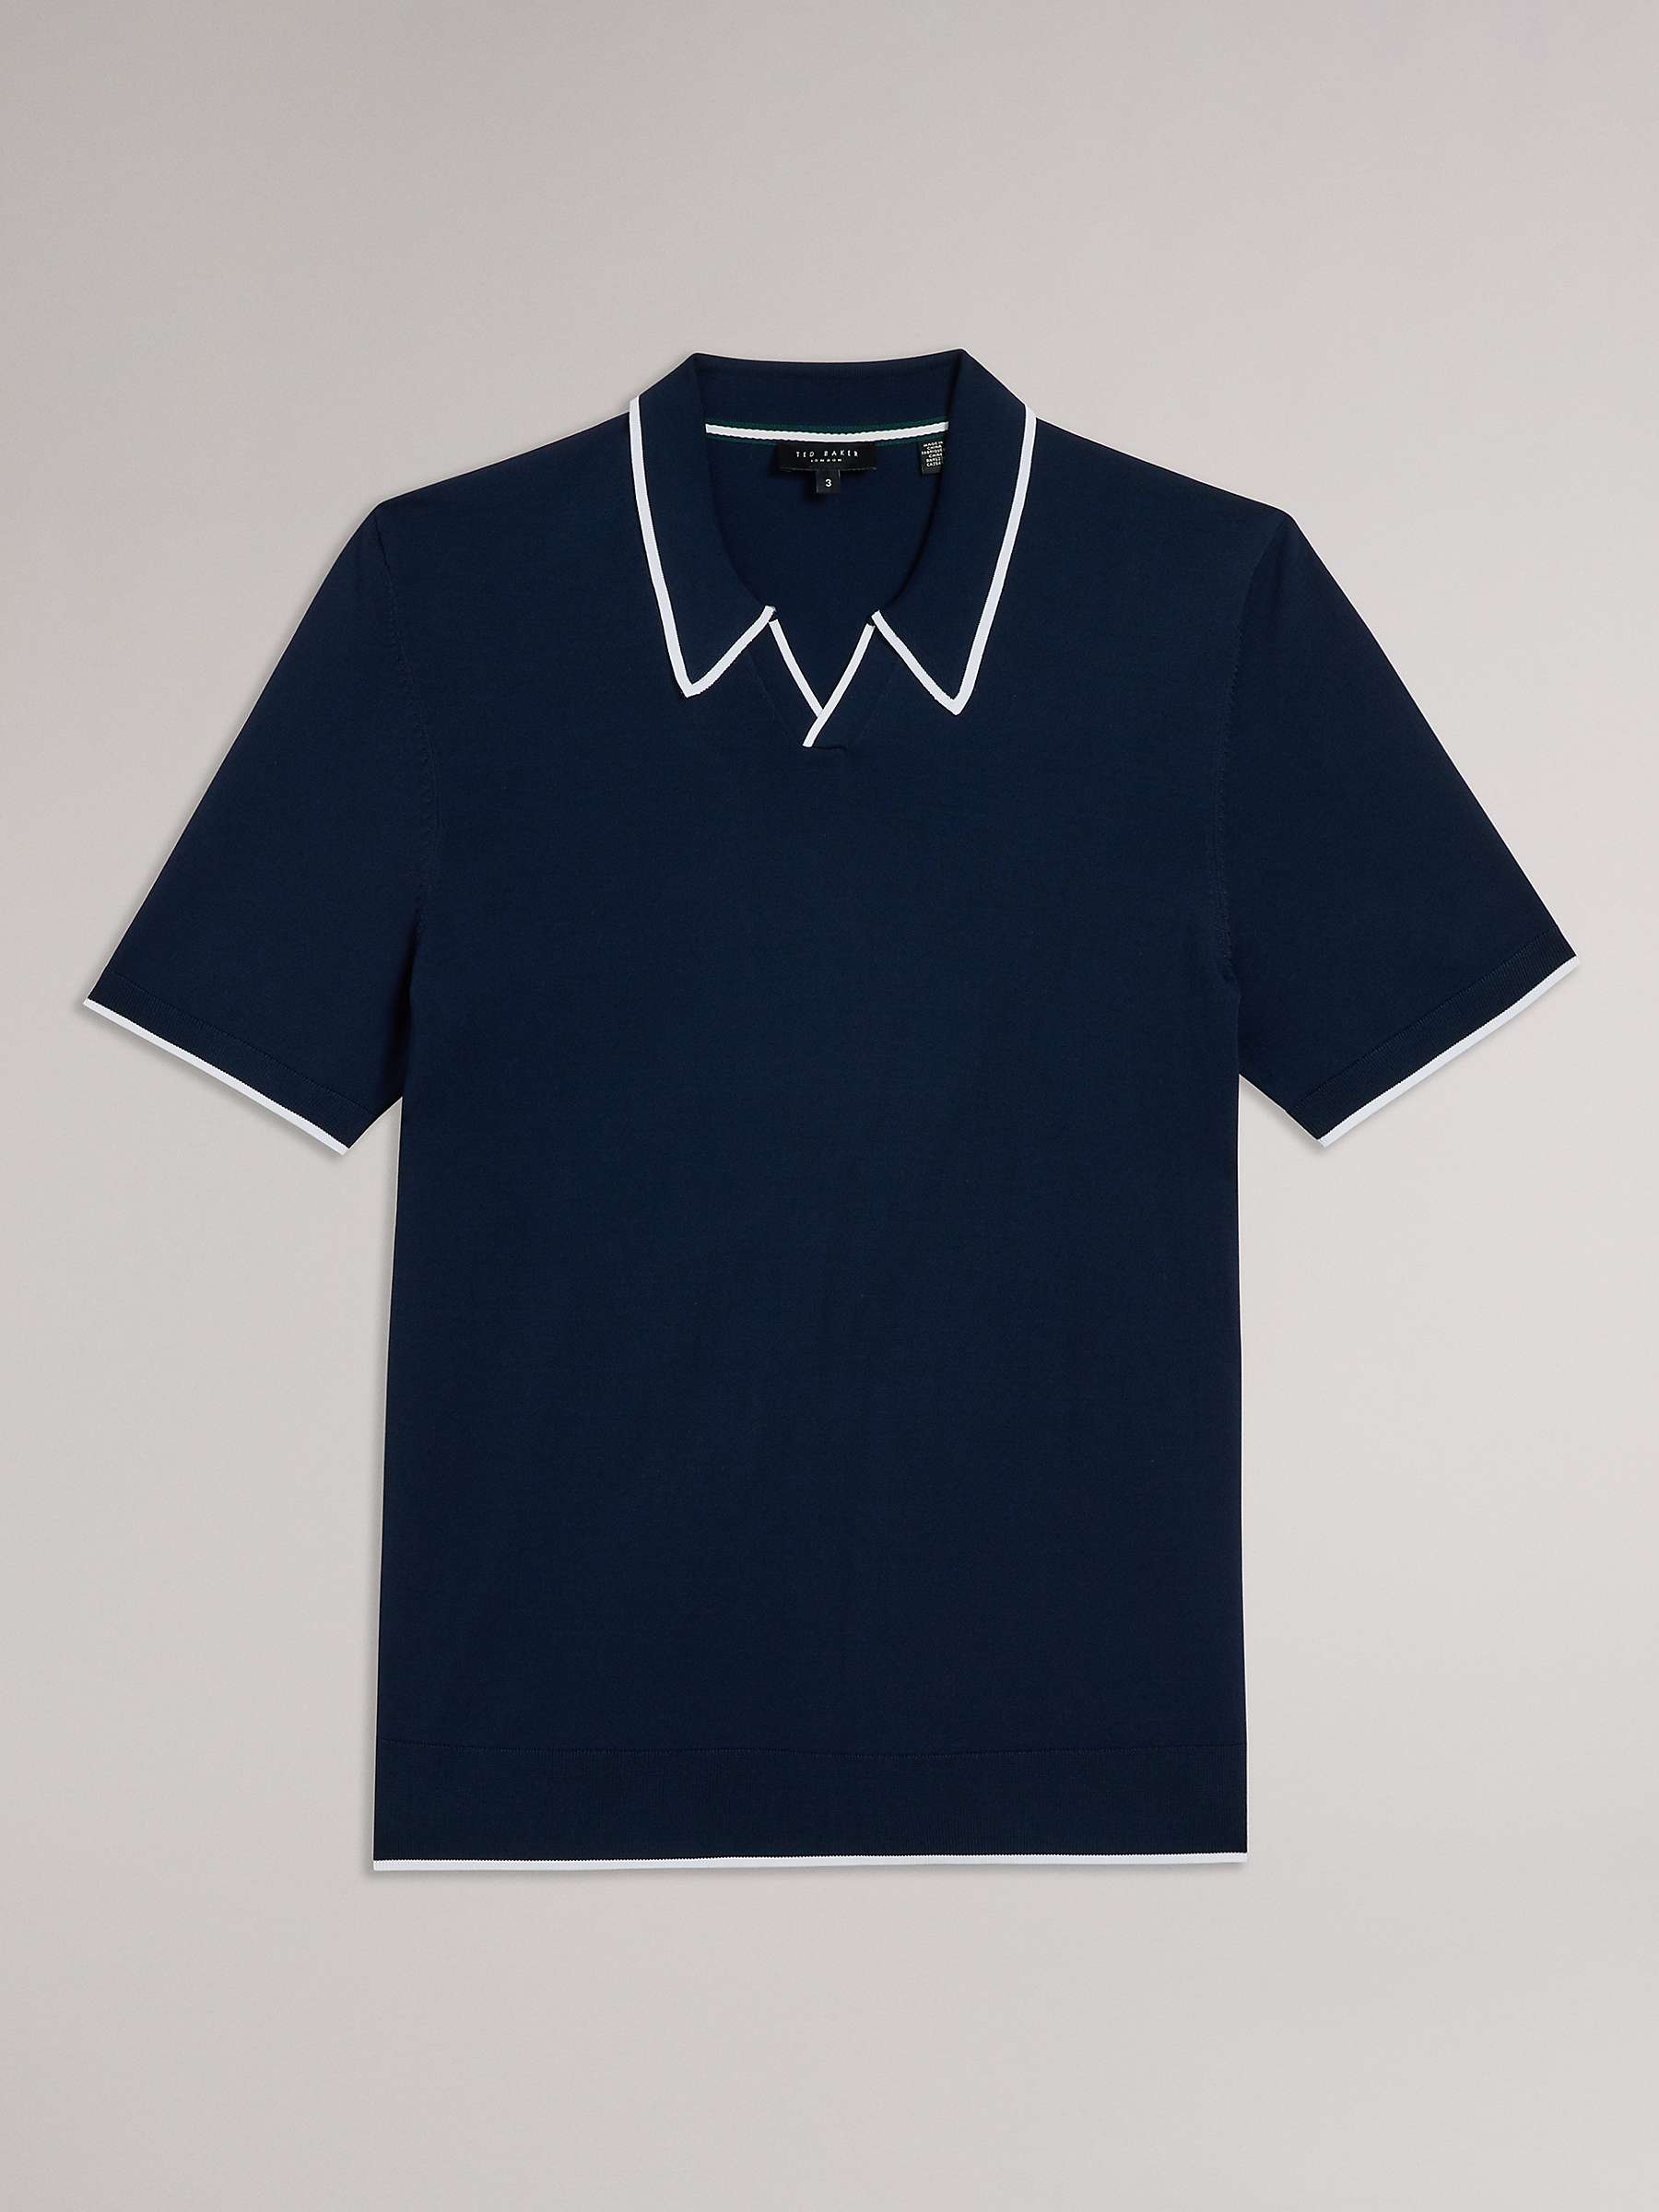 Buy Ted Baker Stortfo Knit Polo Top Online at johnlewis.com